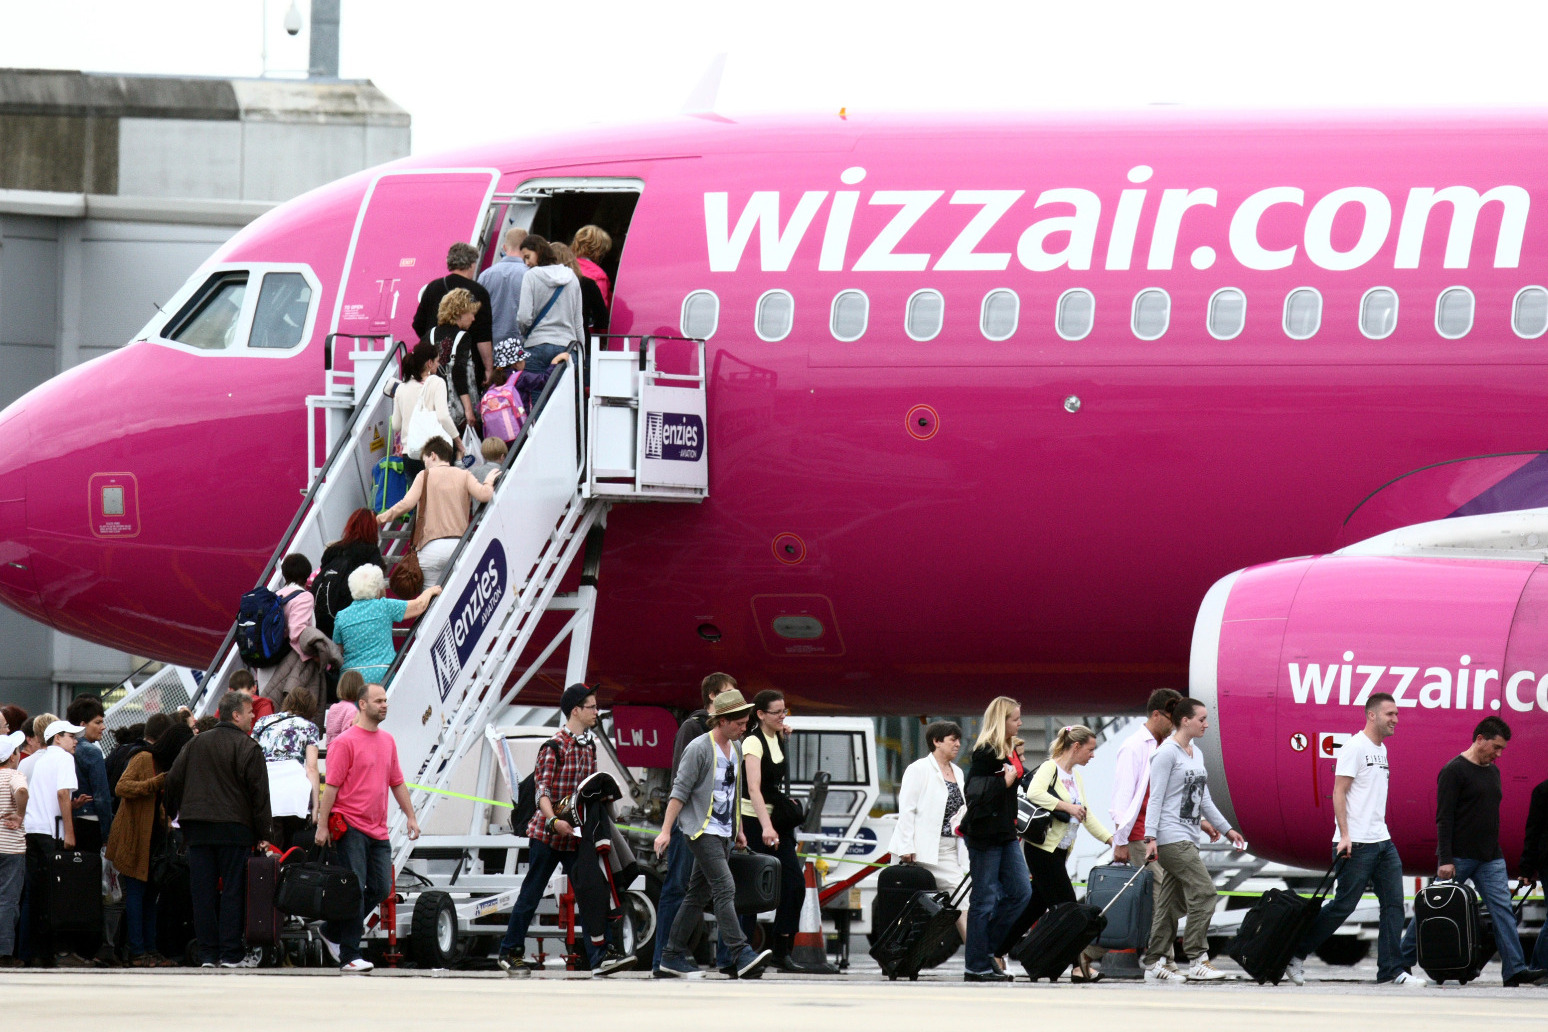 Wizz Air named worst short-haul airline by UK passengers 